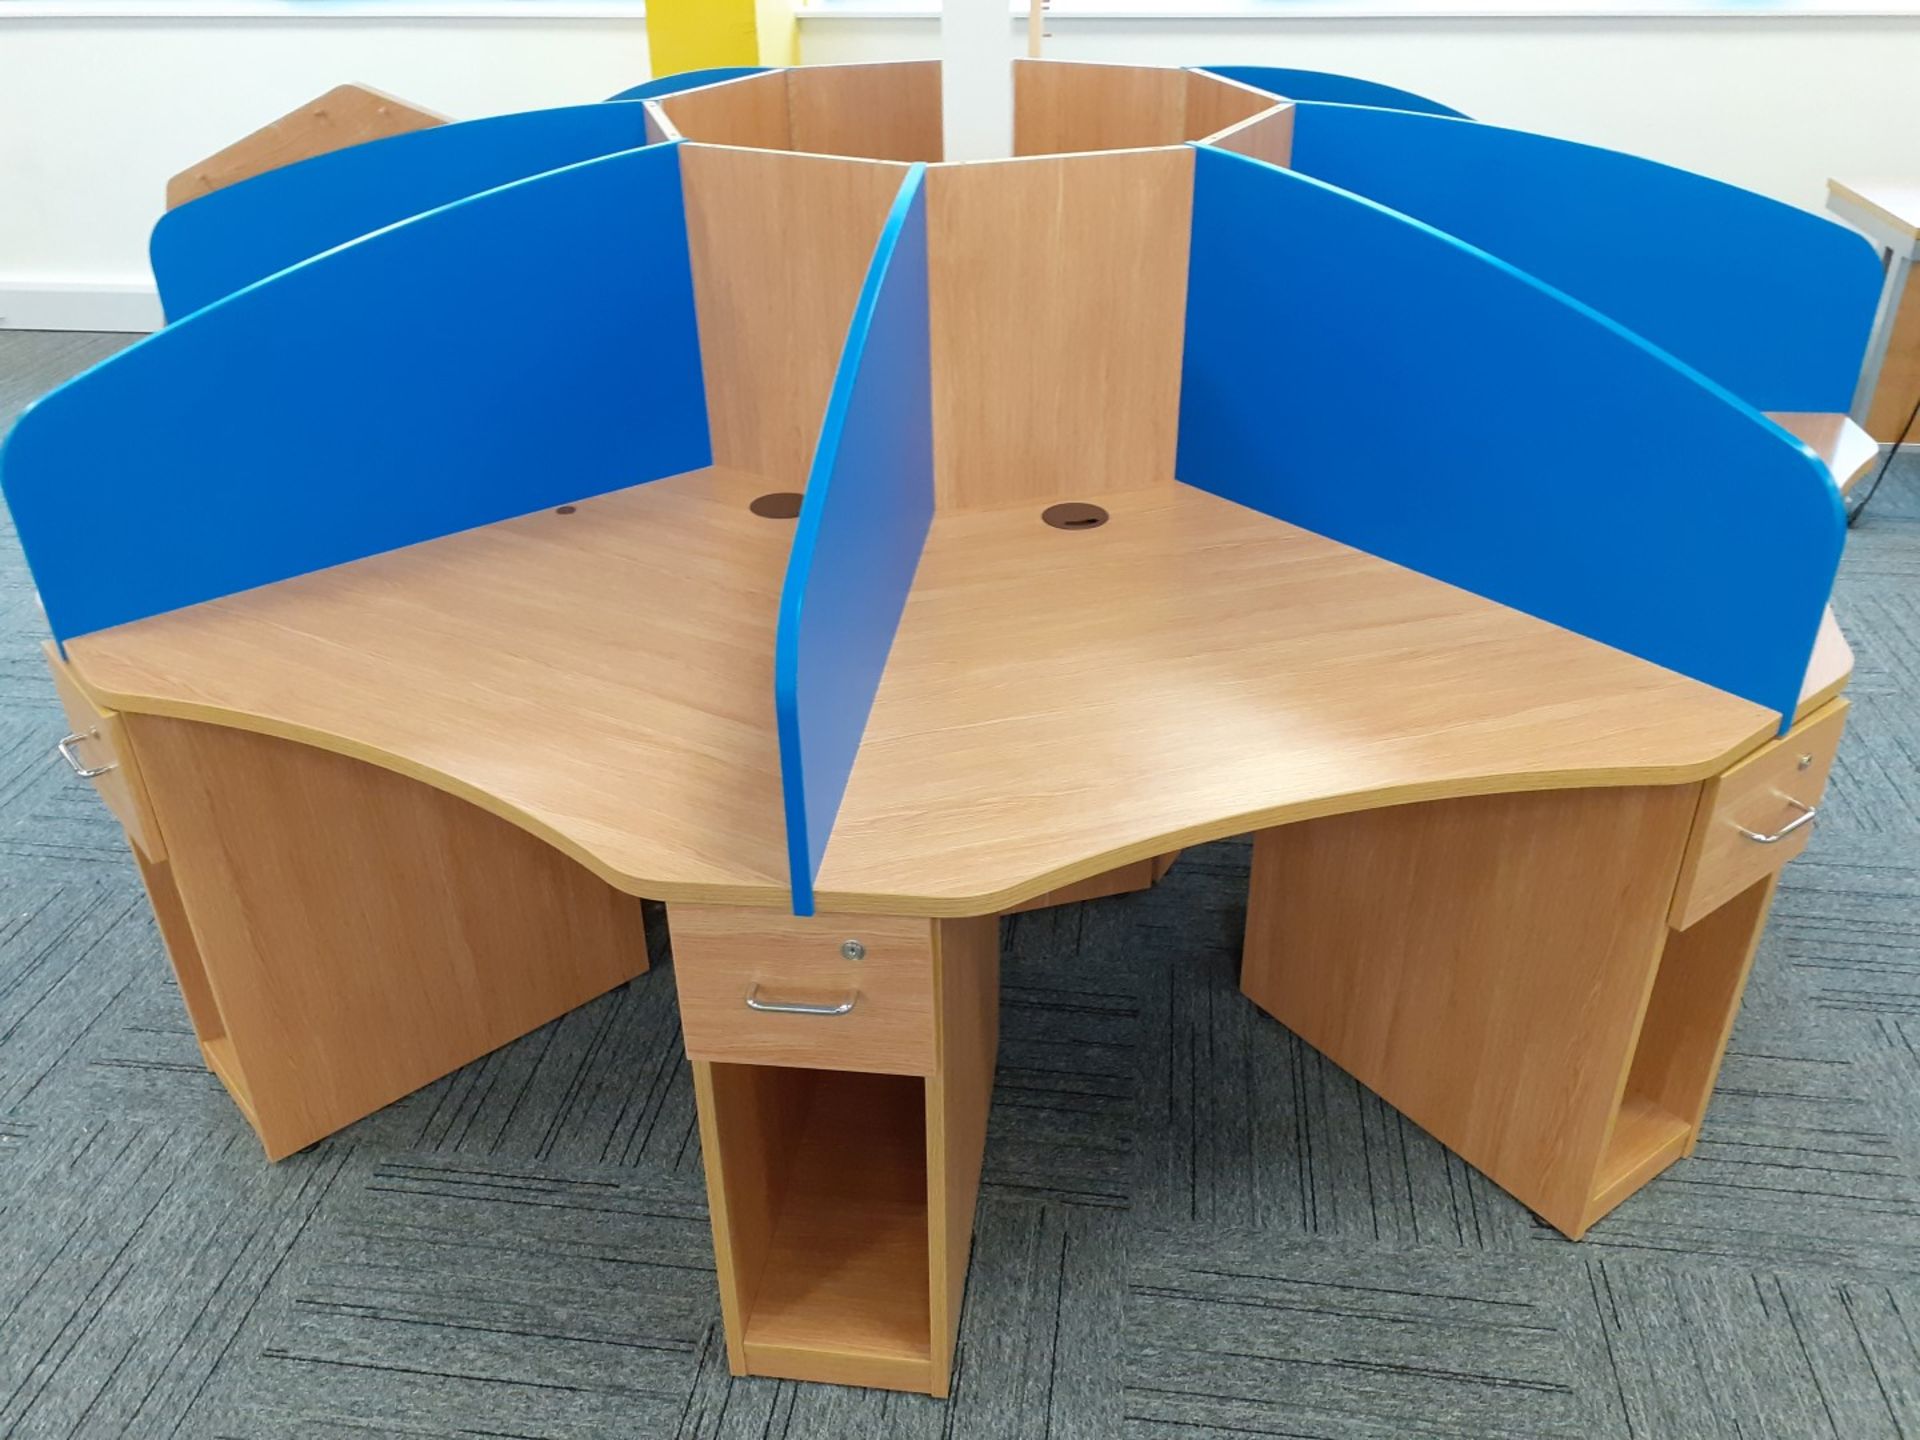 1 x 8-Desk Office Workstation Pod With Privacy Partitions In A Beech Finish - Original RRP £2,525